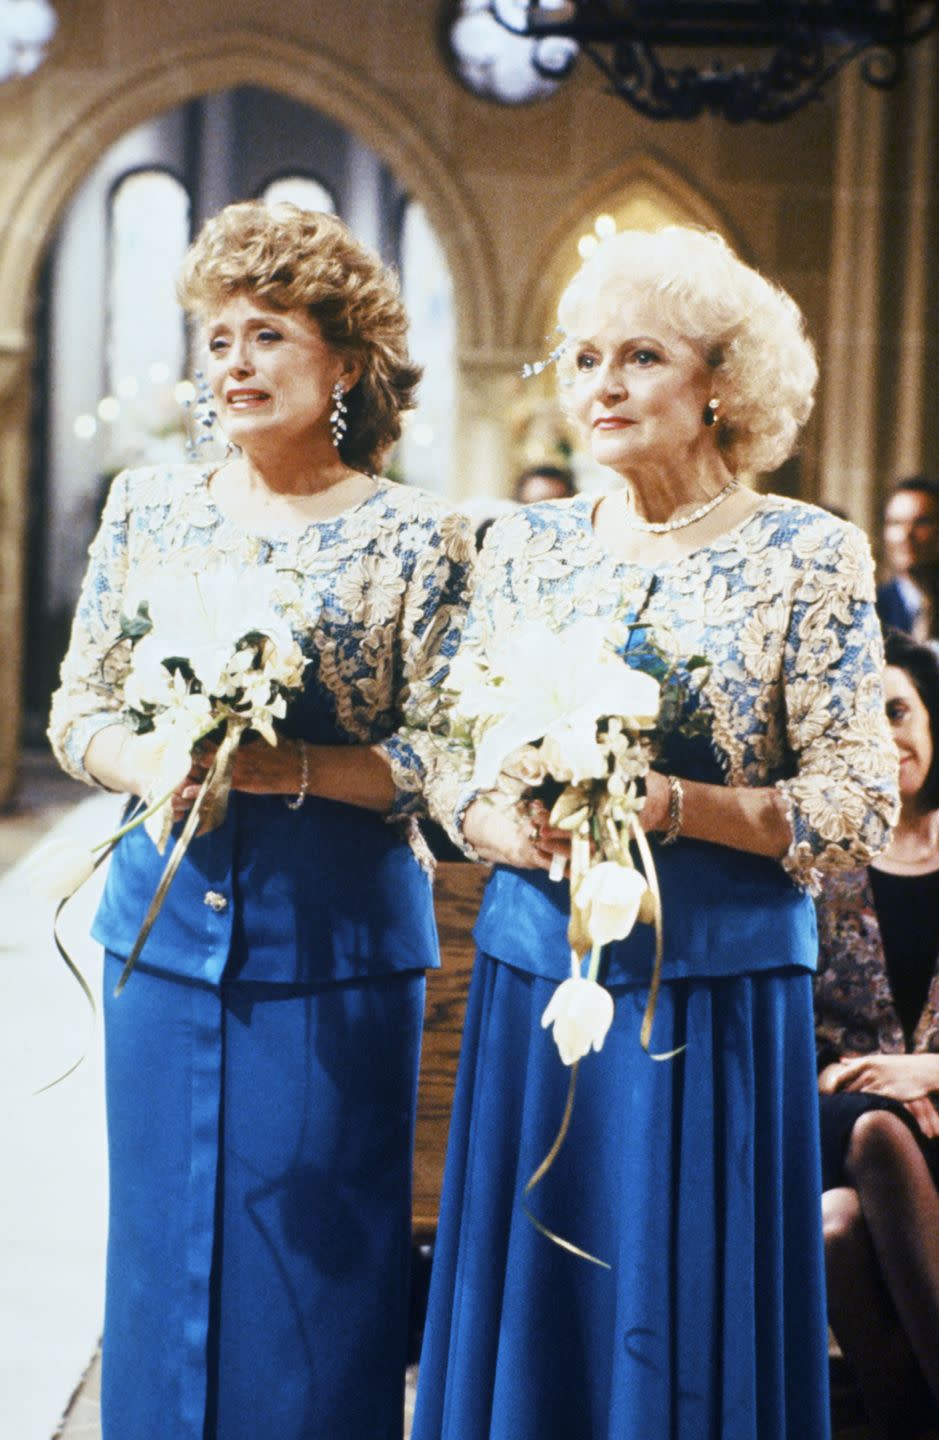 Betty White and Rue McClanahan played games between takes